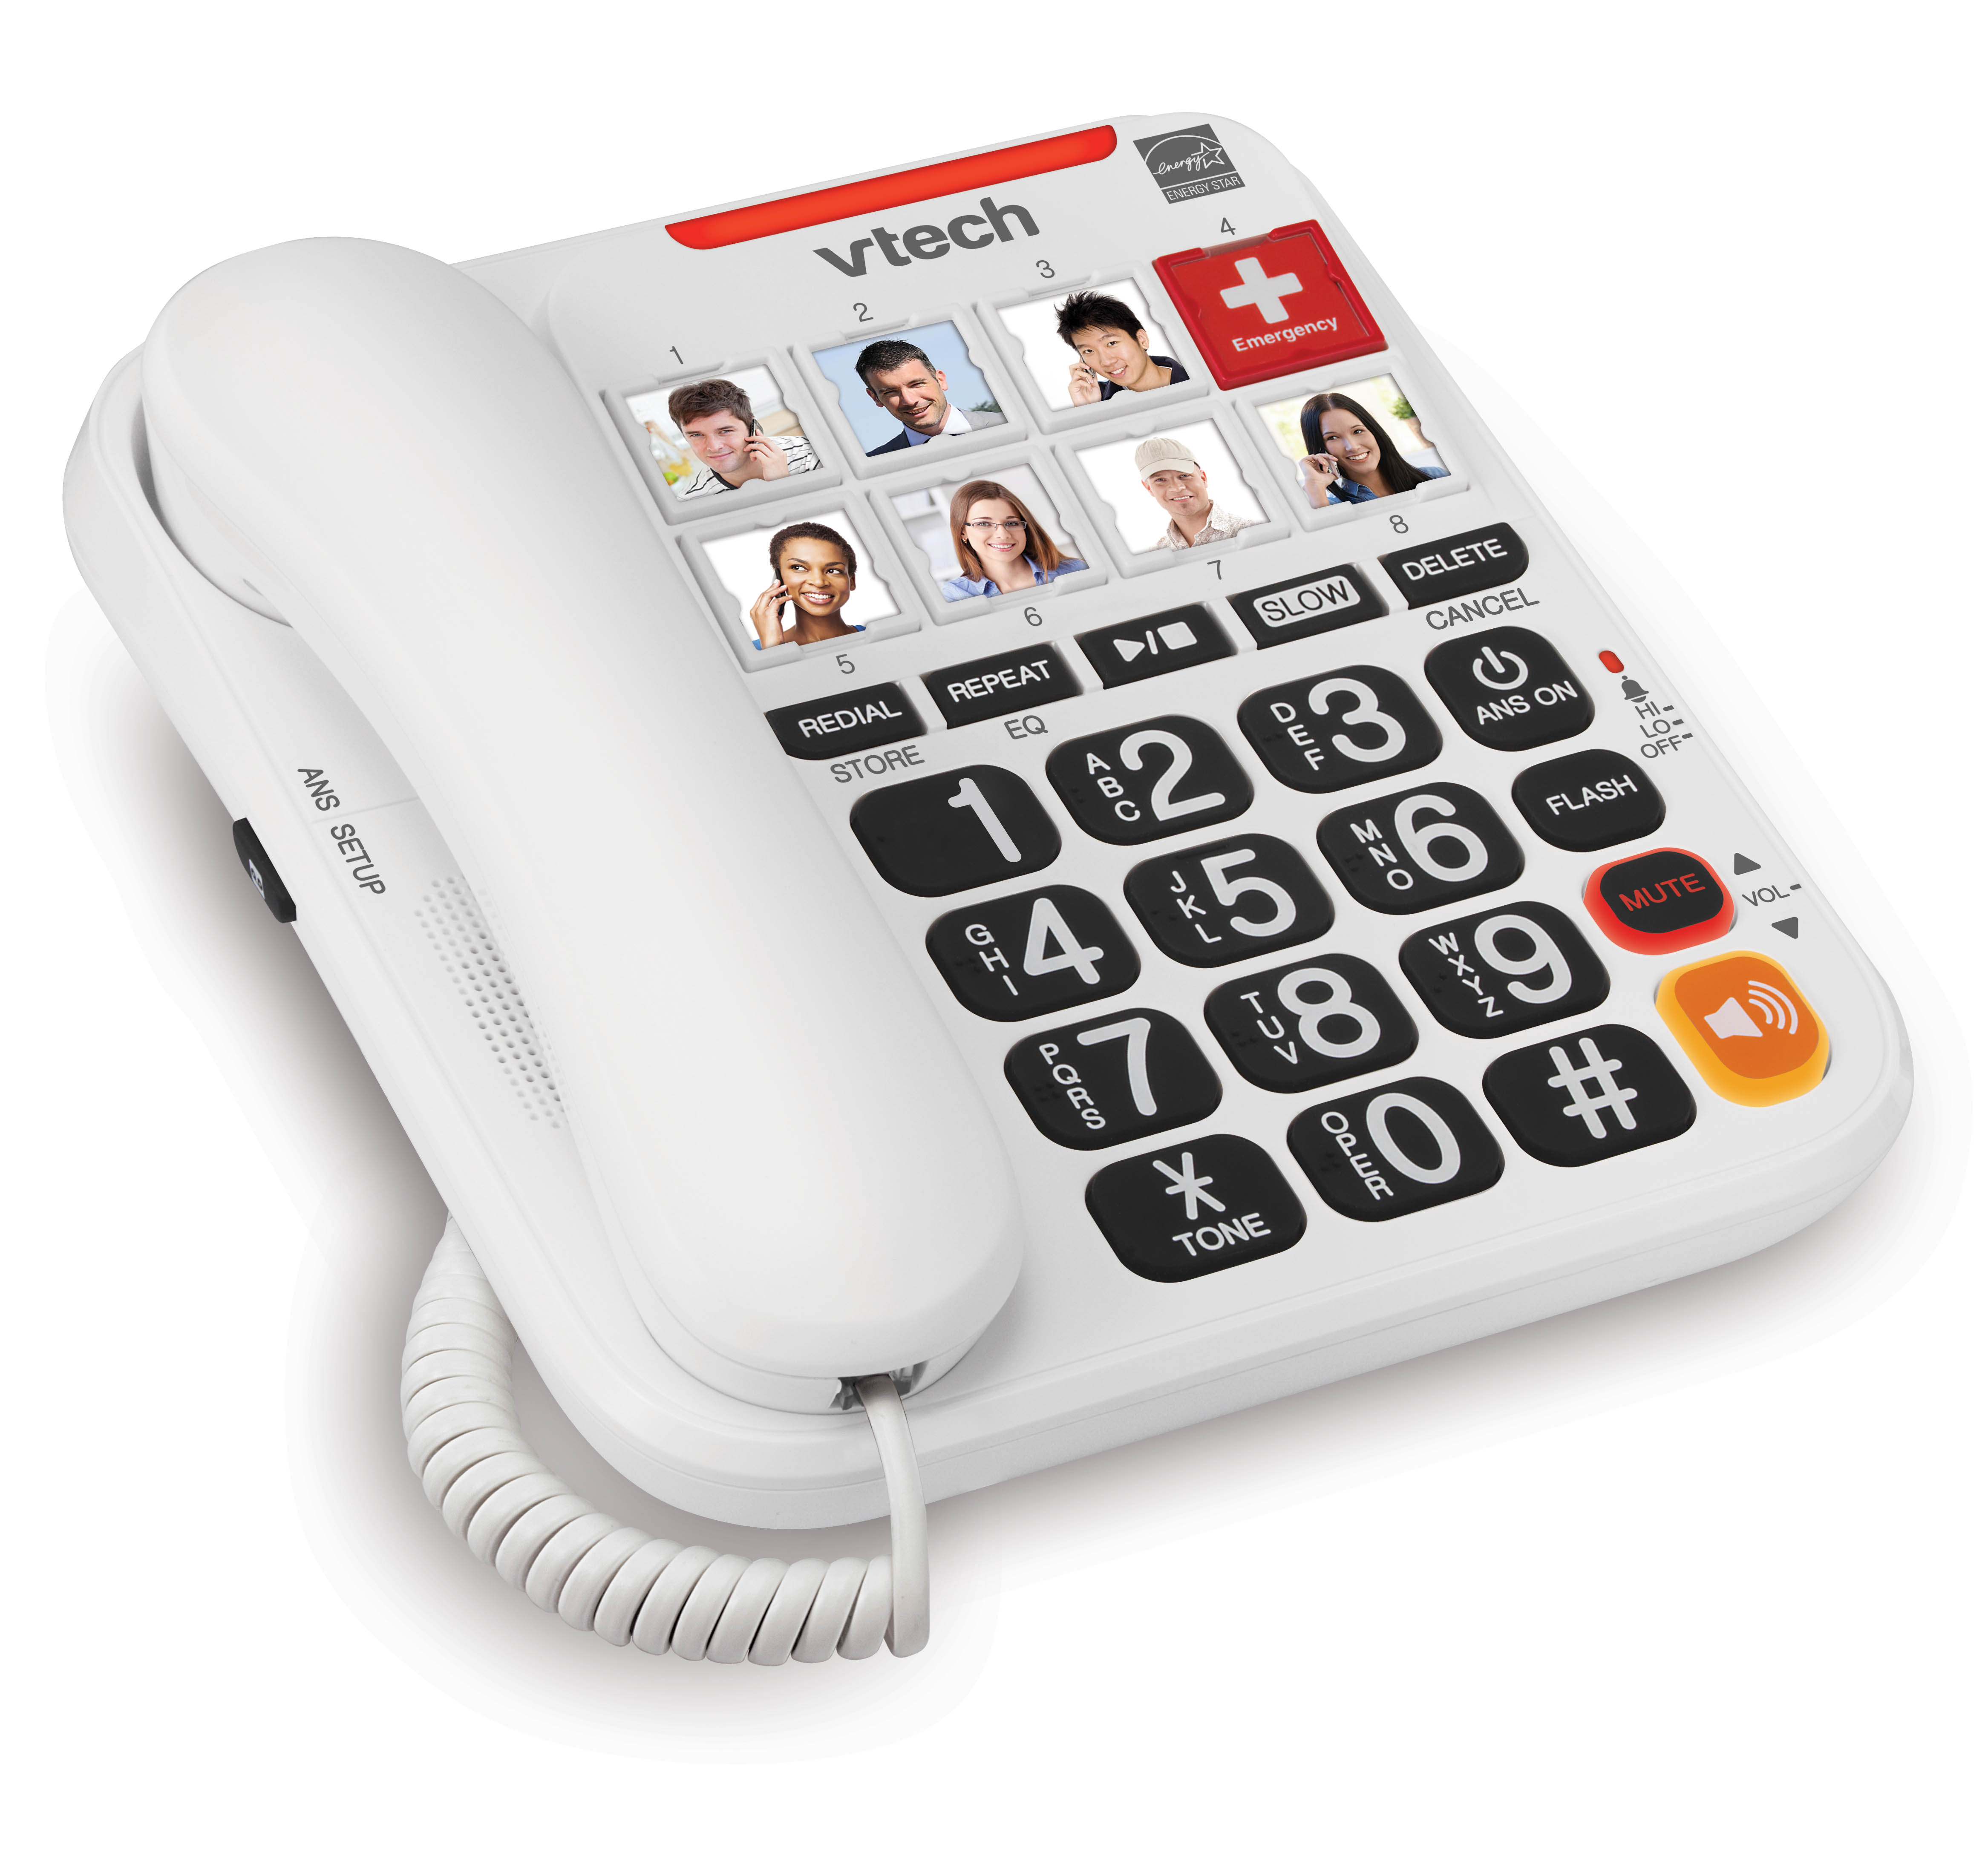 Amplified Corded Answering System with 8 Photo Speed Dial, 90dB Ringer Volume, Oversized High-Contrast buttons, and One-touch Audio Booster up to 40db - view 12